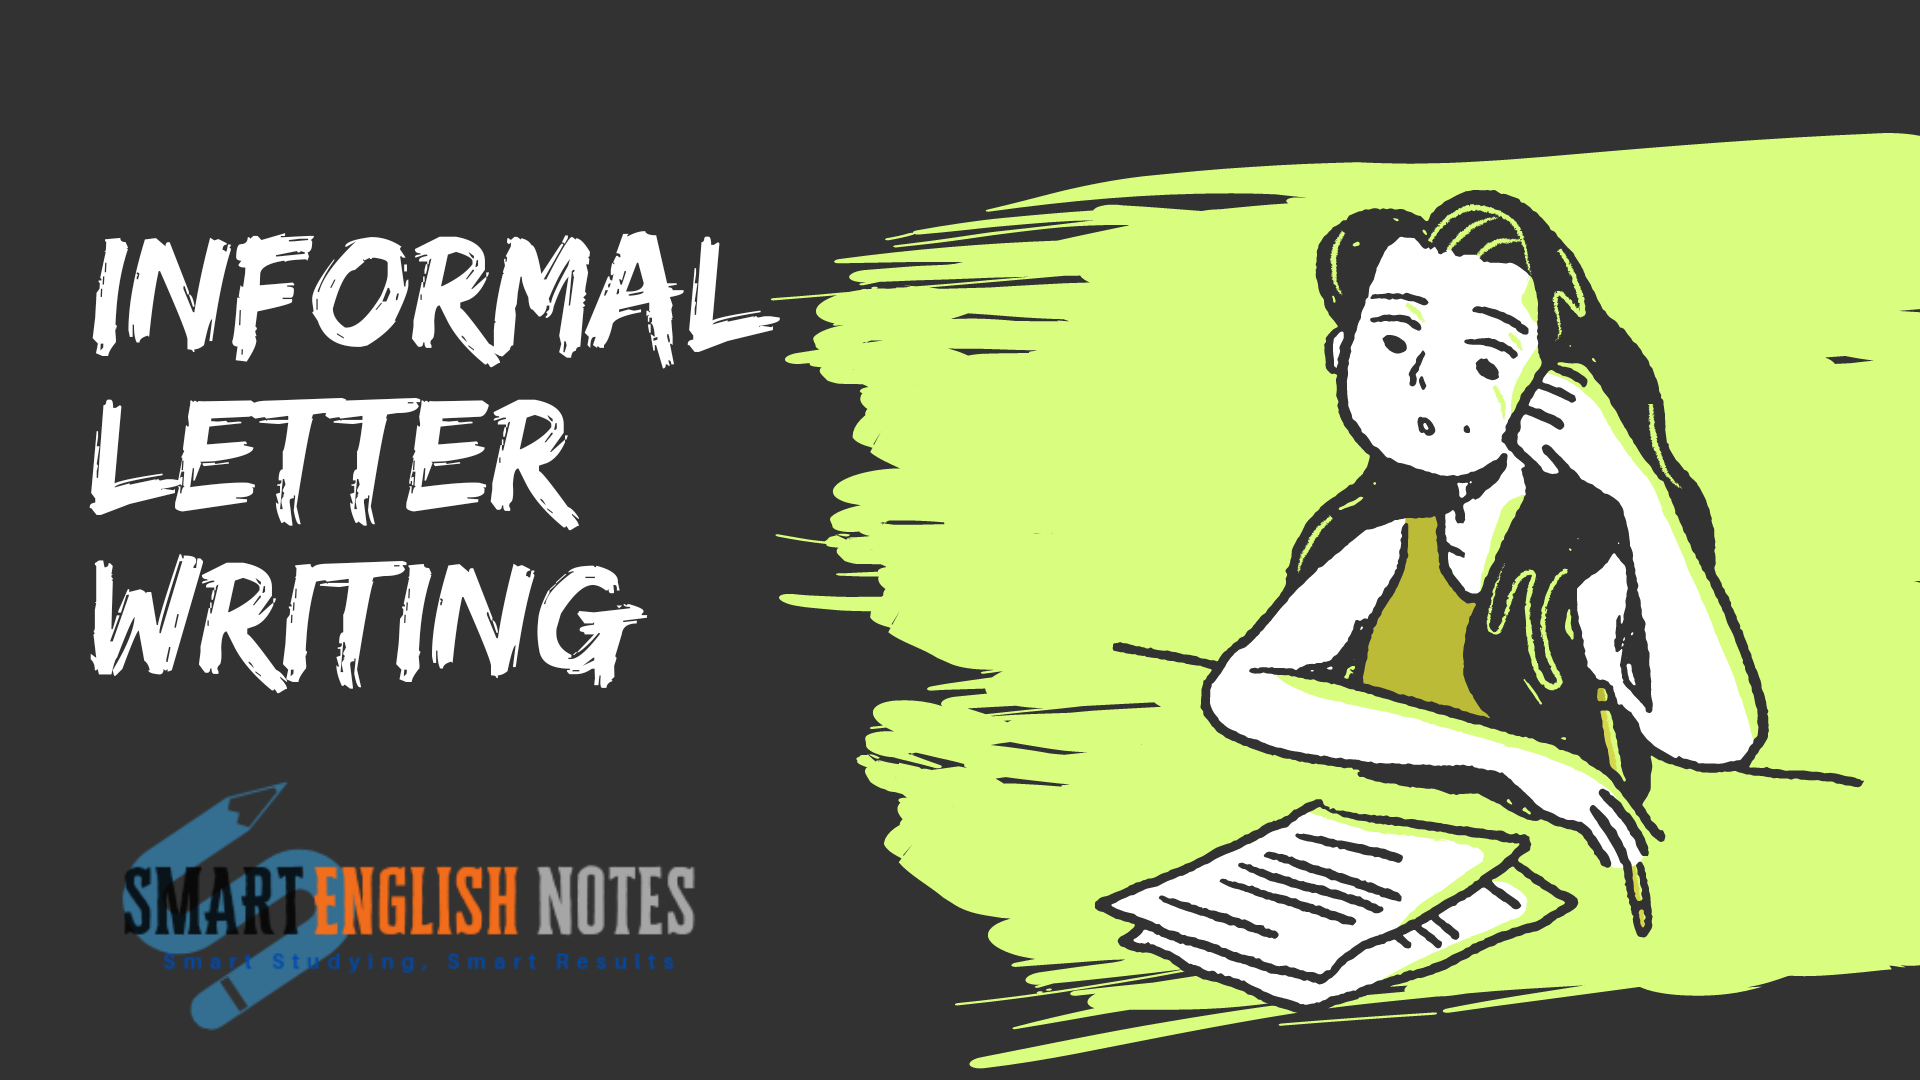 Informal Letter Writing- Types, Parts, Format and Samples of Informal Letters 10